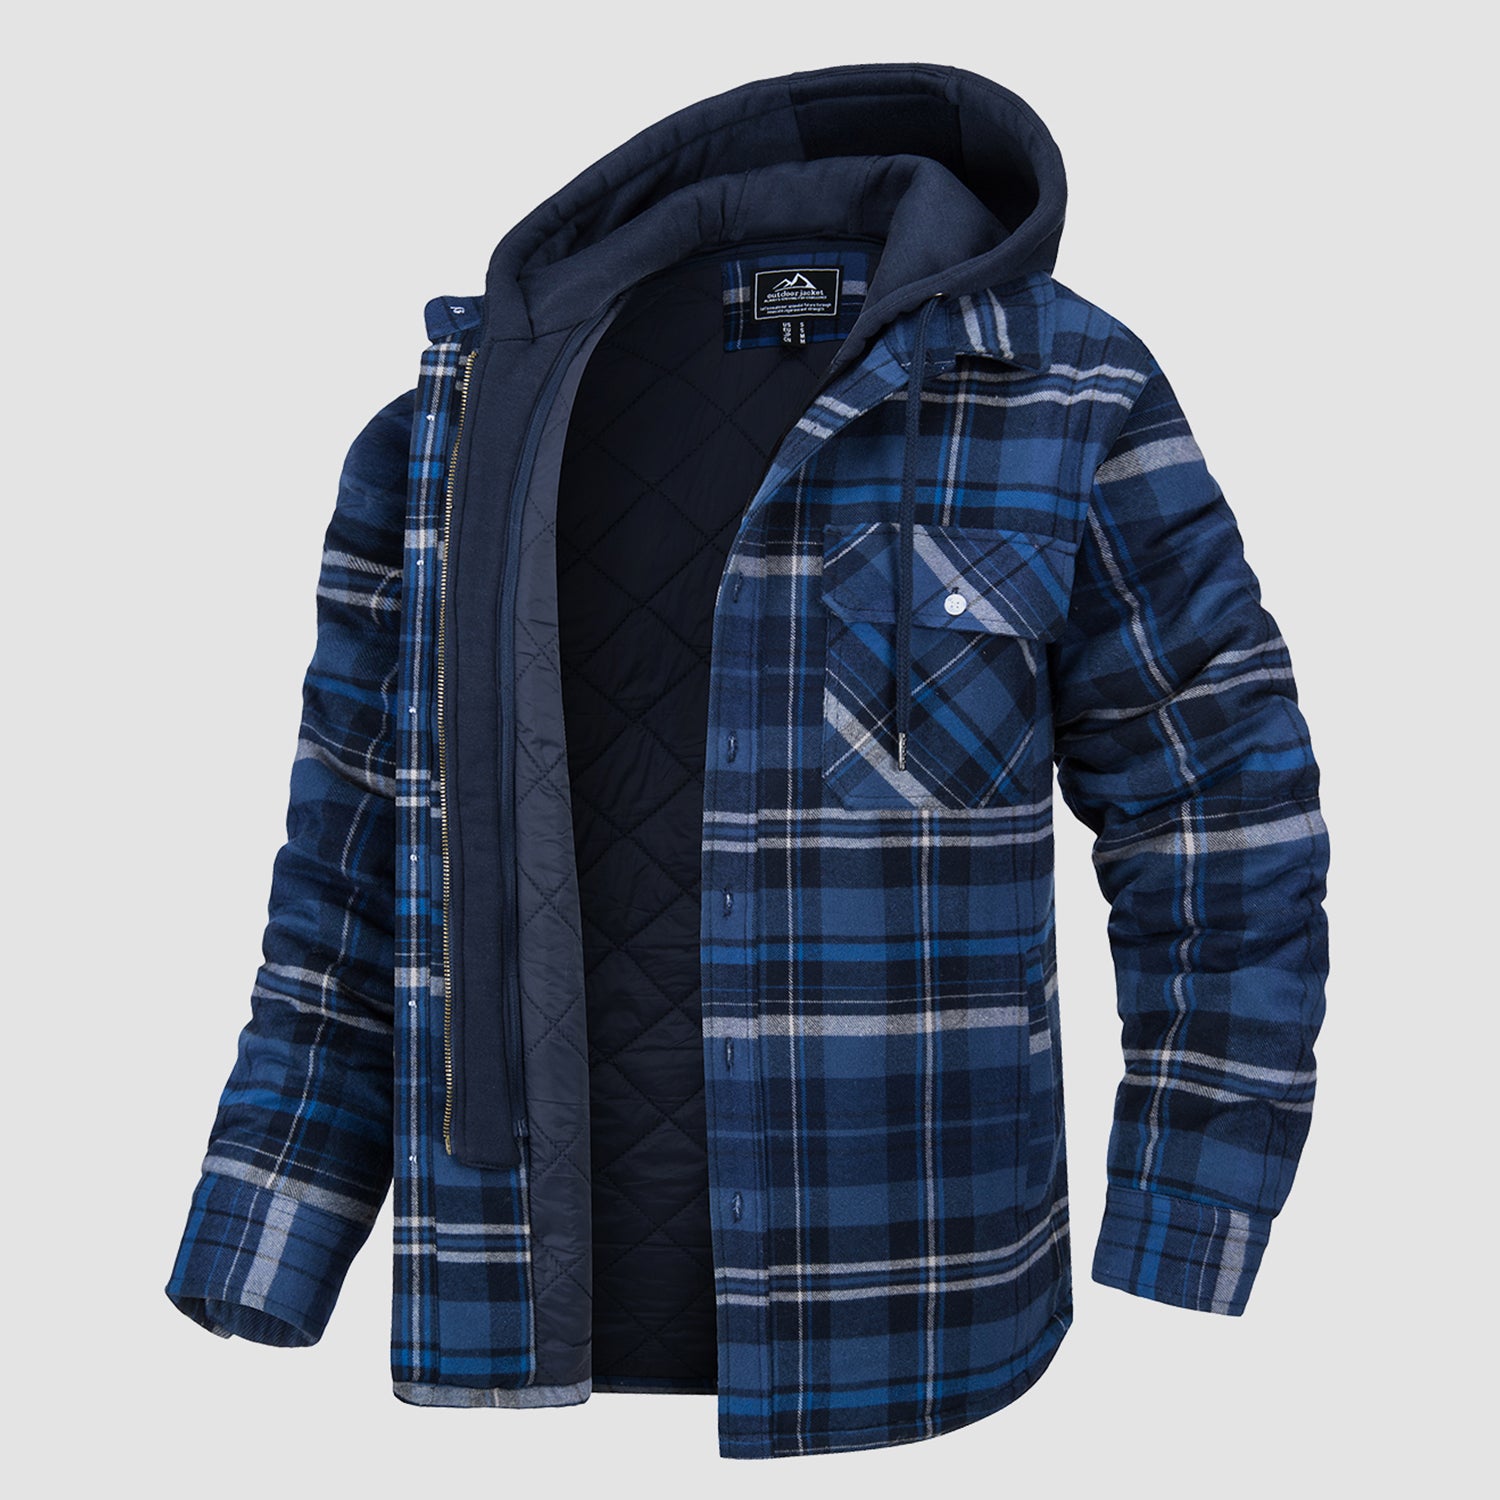 Men's Plaid Quilted Lined Shirt Jacket with Removable Hood